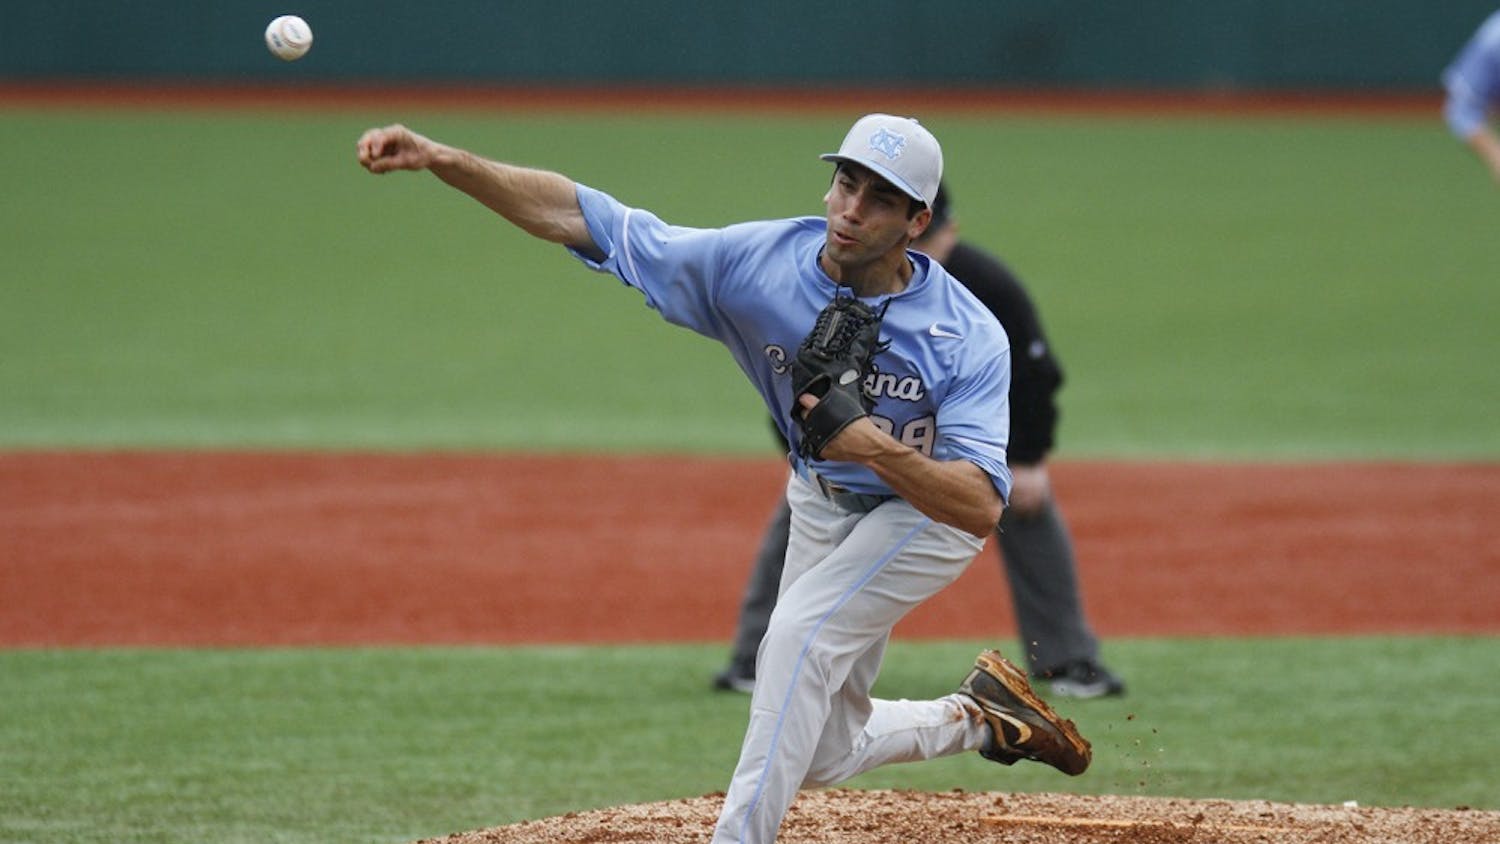 UNC pitcher Benton Moss (39) delivers a pitch in the game against Duke on Saturday. Carolina was defeated by the Blue Devils in their three game series 3-0 at Jack Coombs Field in Durham, NC. 